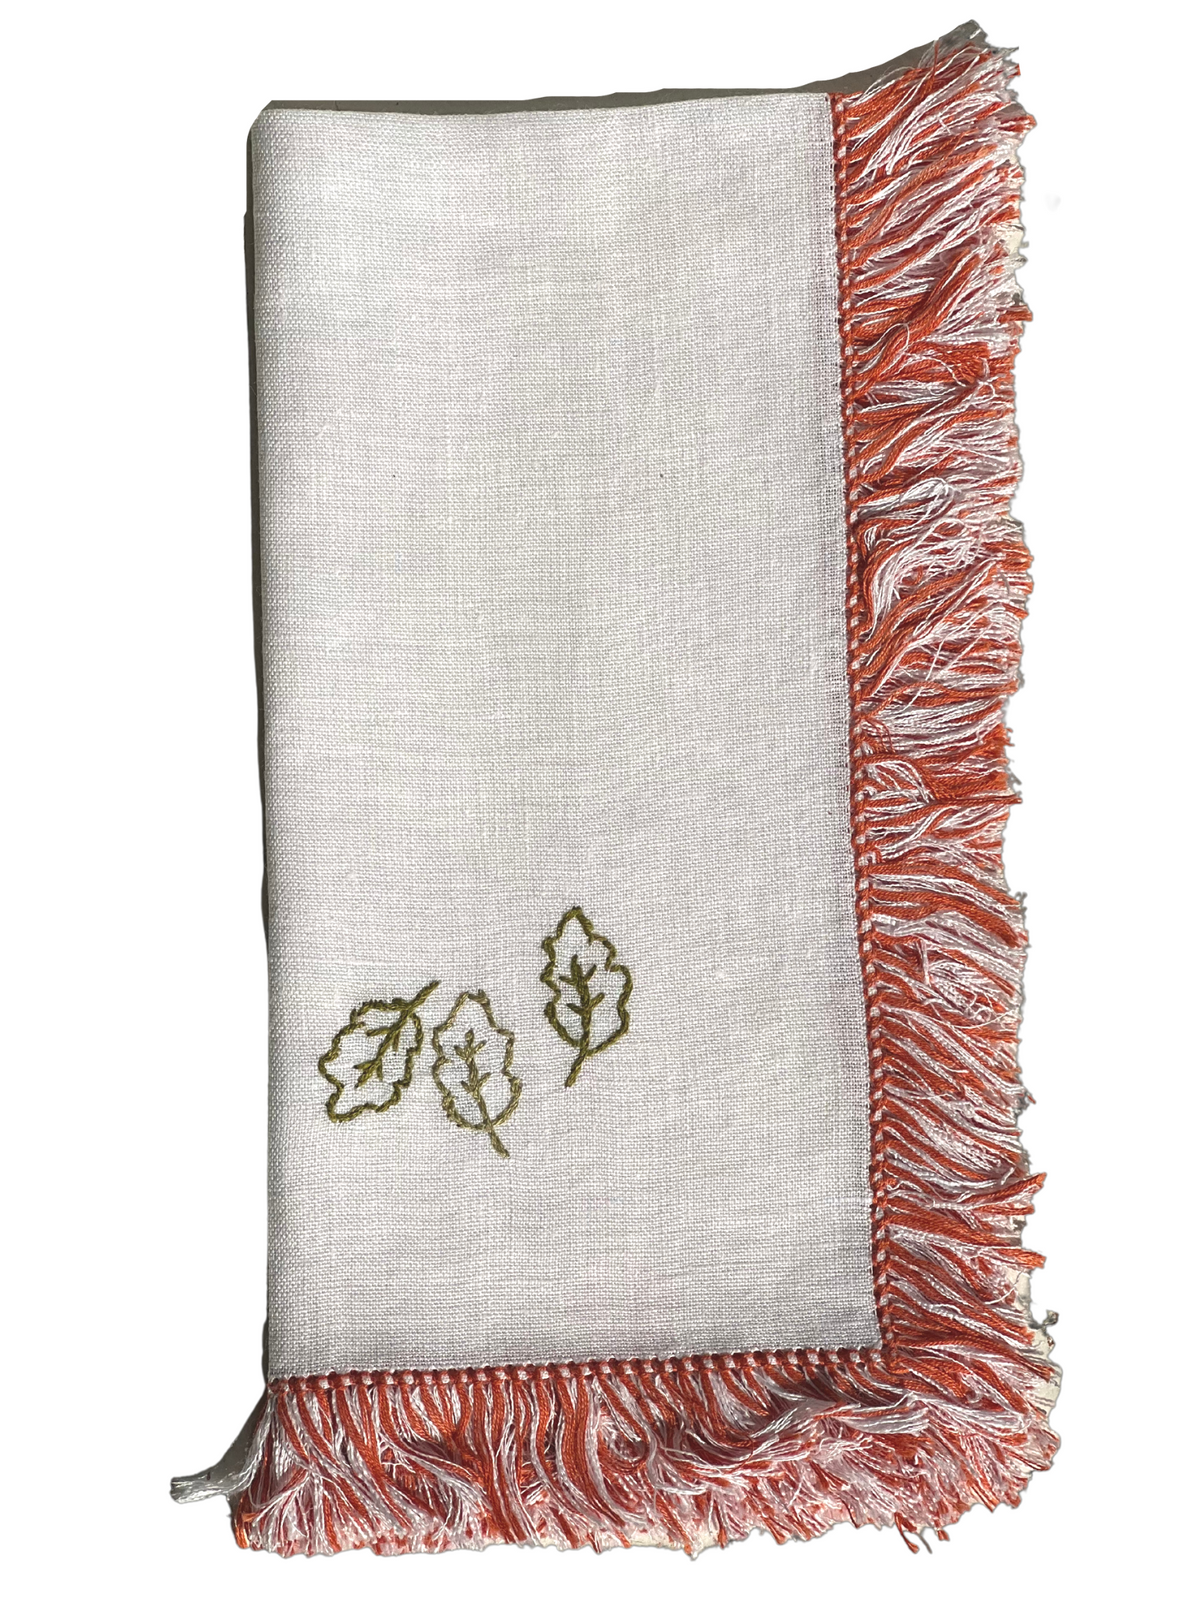 Fringe Dinner Napkin with Hand Stitched Leafs - Holiday Collection